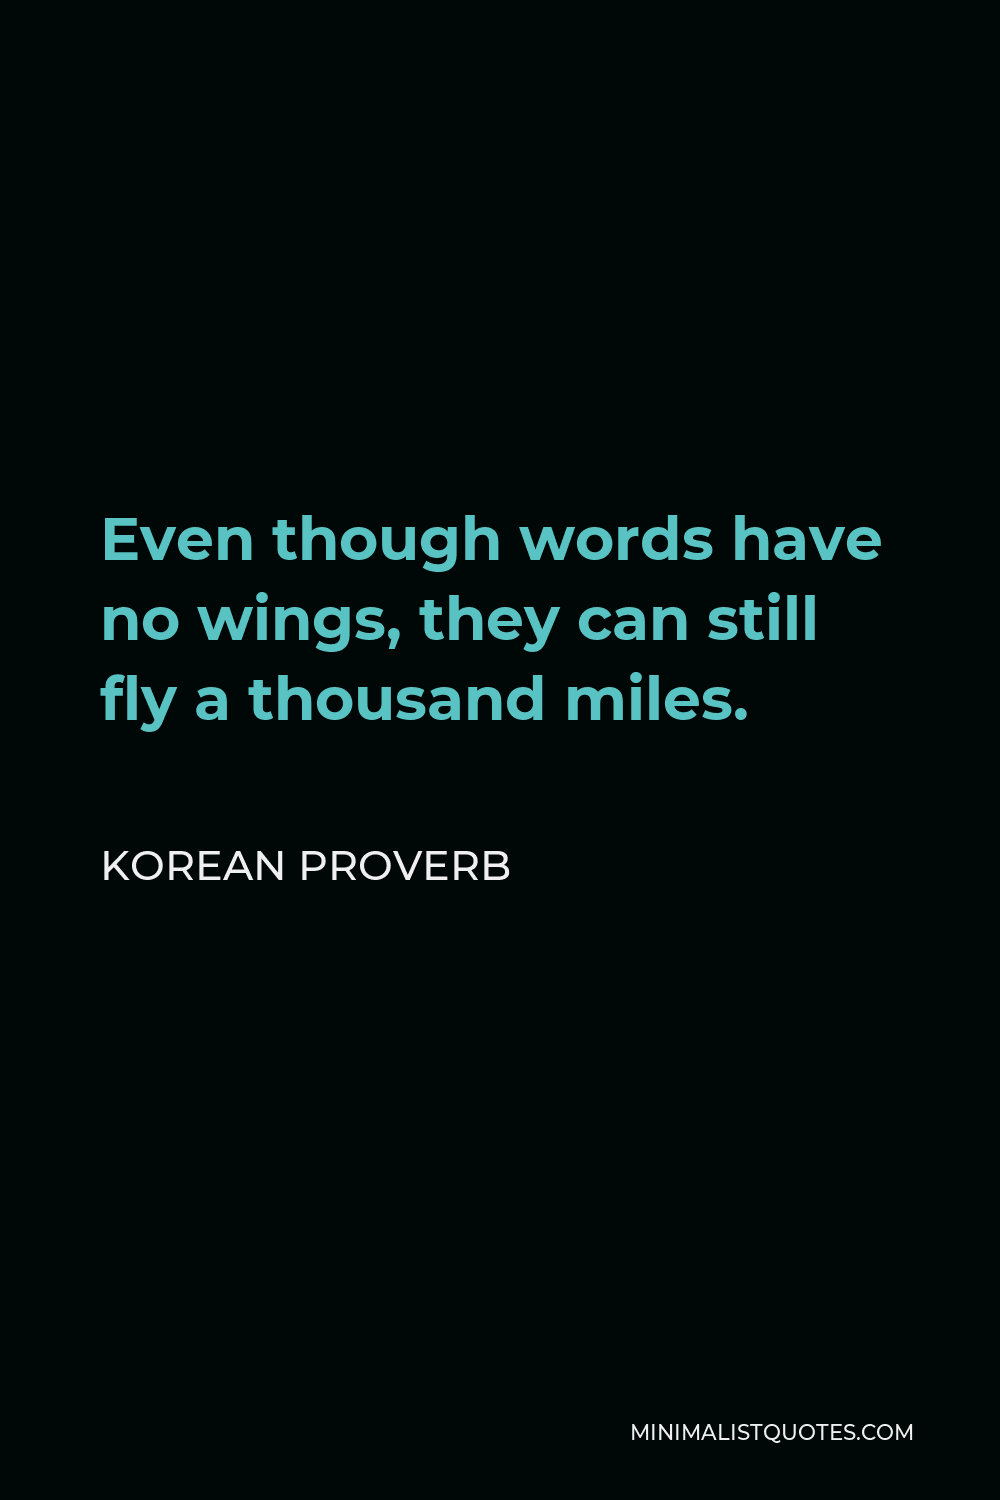 Korean Proverb Quote - Even though words have no wings, they can still fly a thousand miles.